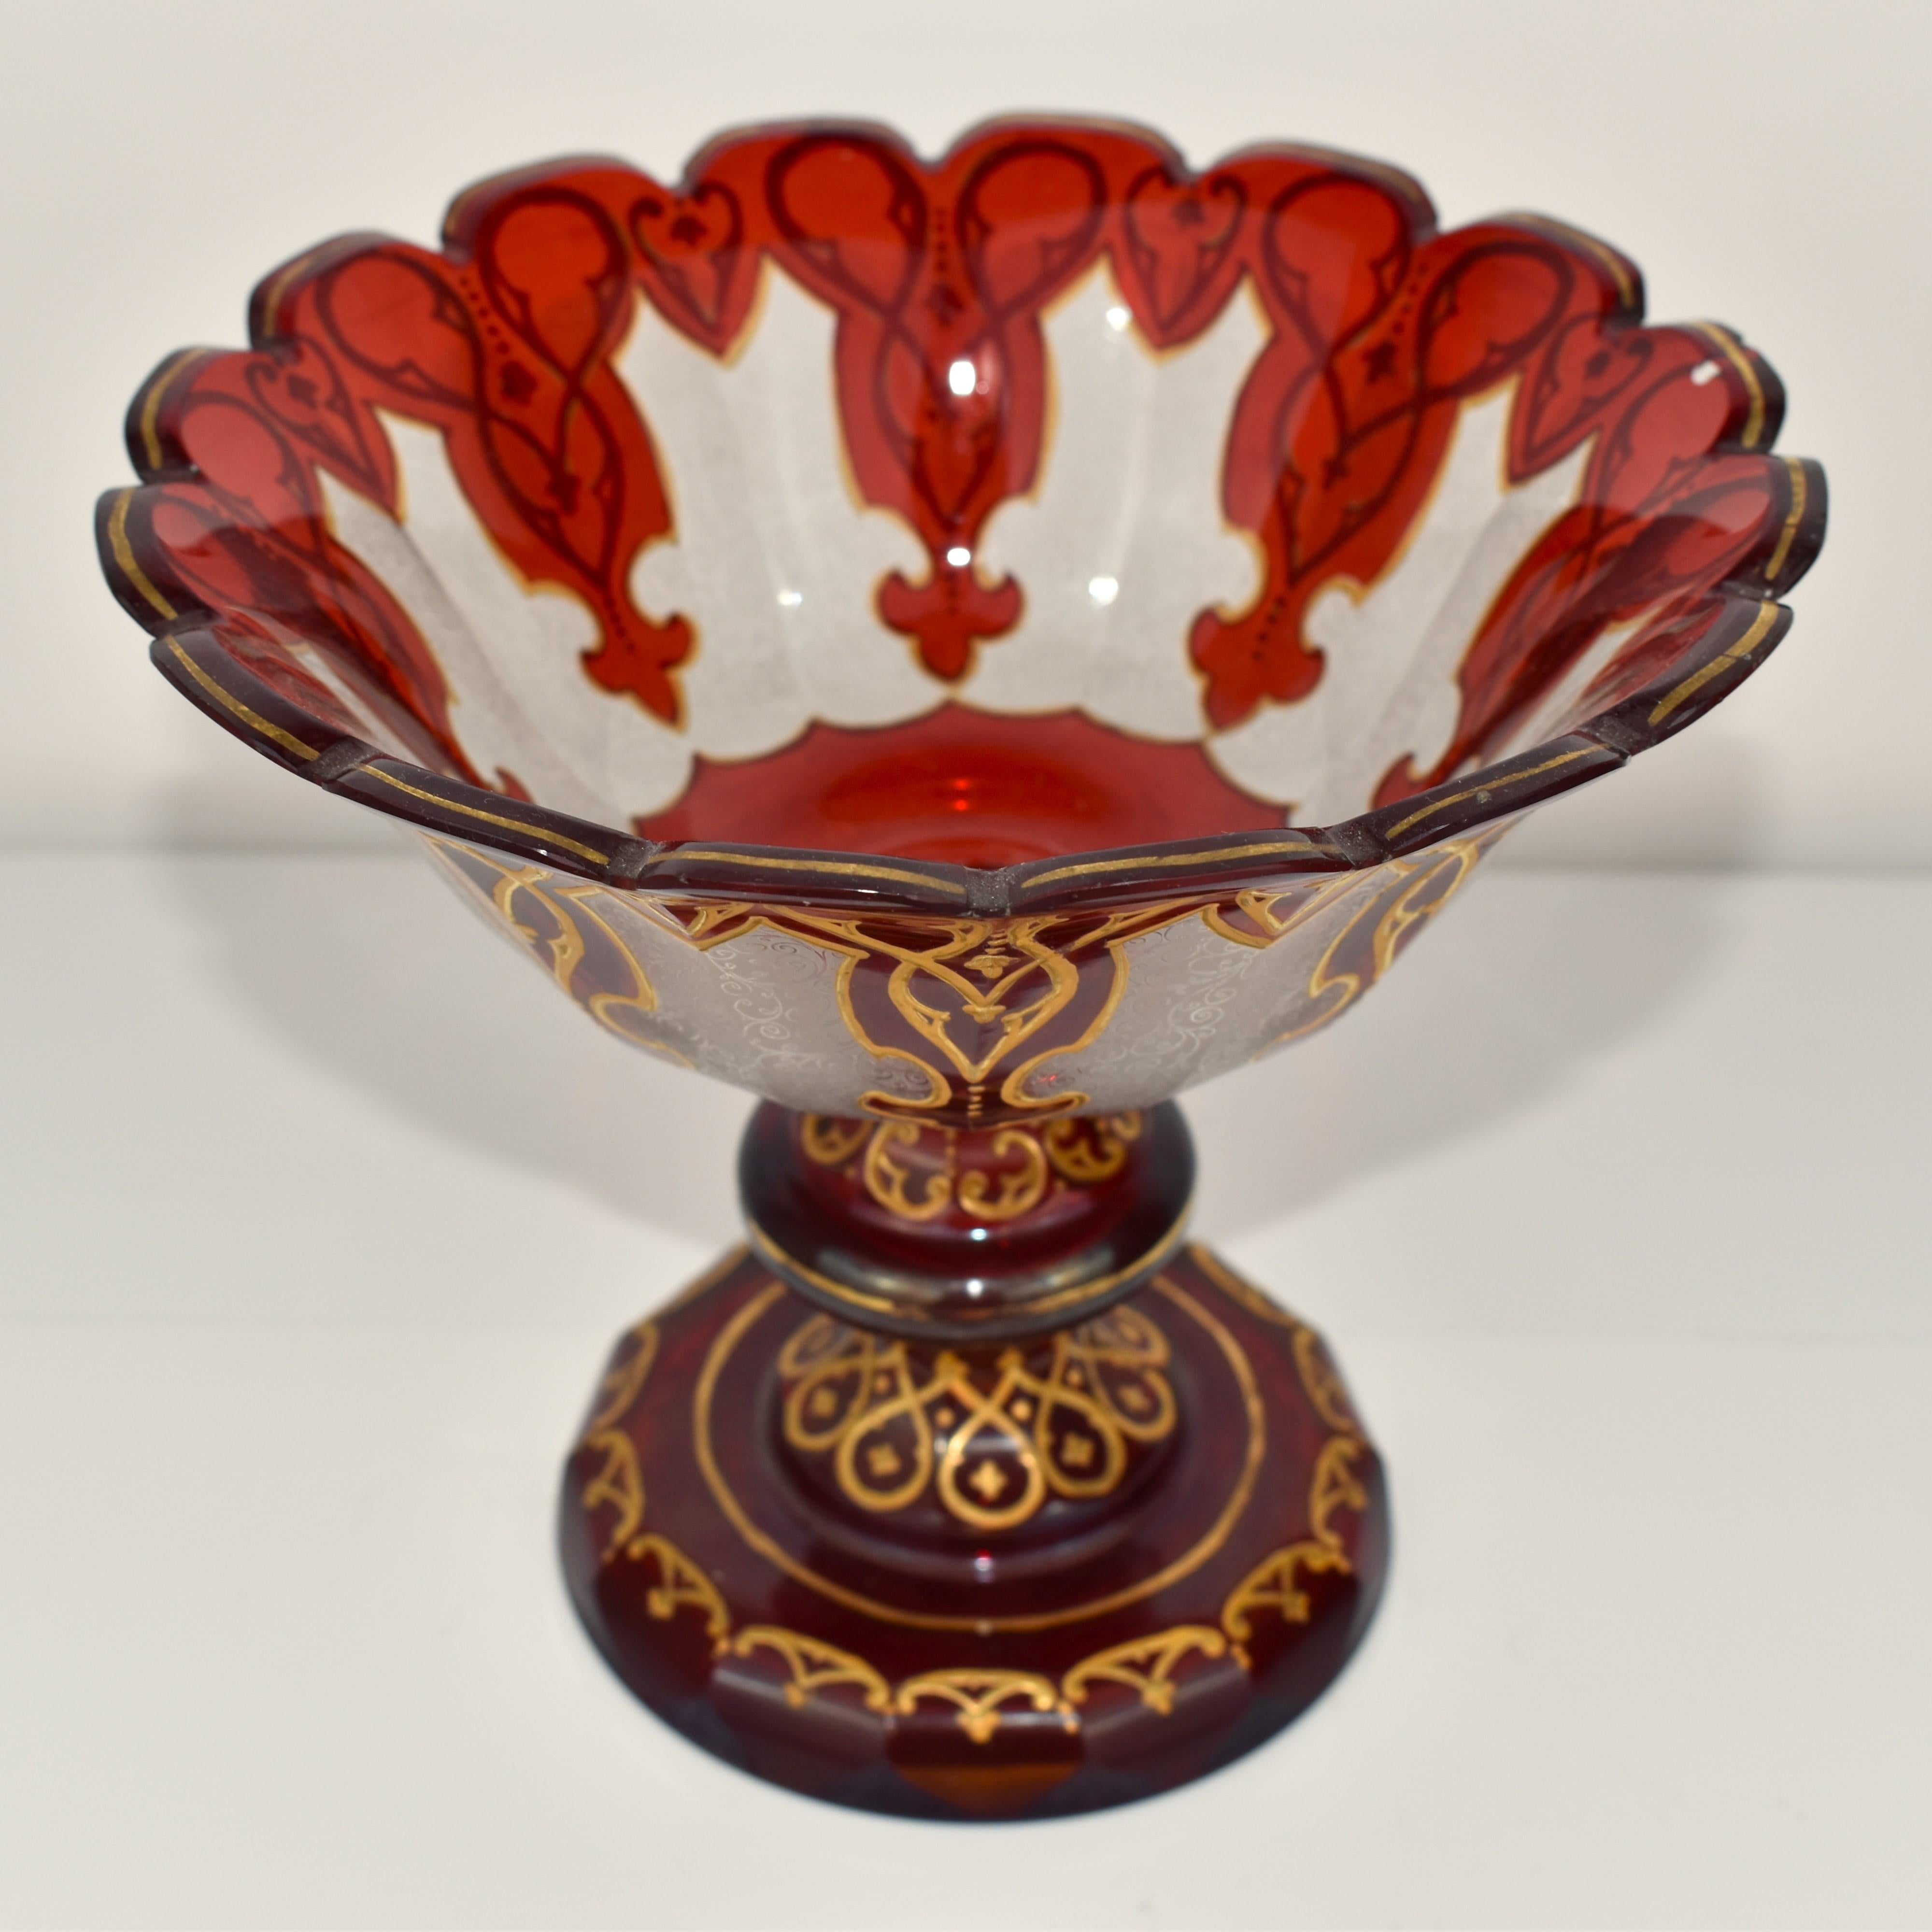 ANTIQUE BOHEMIAN GLASS CENTERPIECE, 19th CENTURY In Good Condition For Sale In Rostock, MV